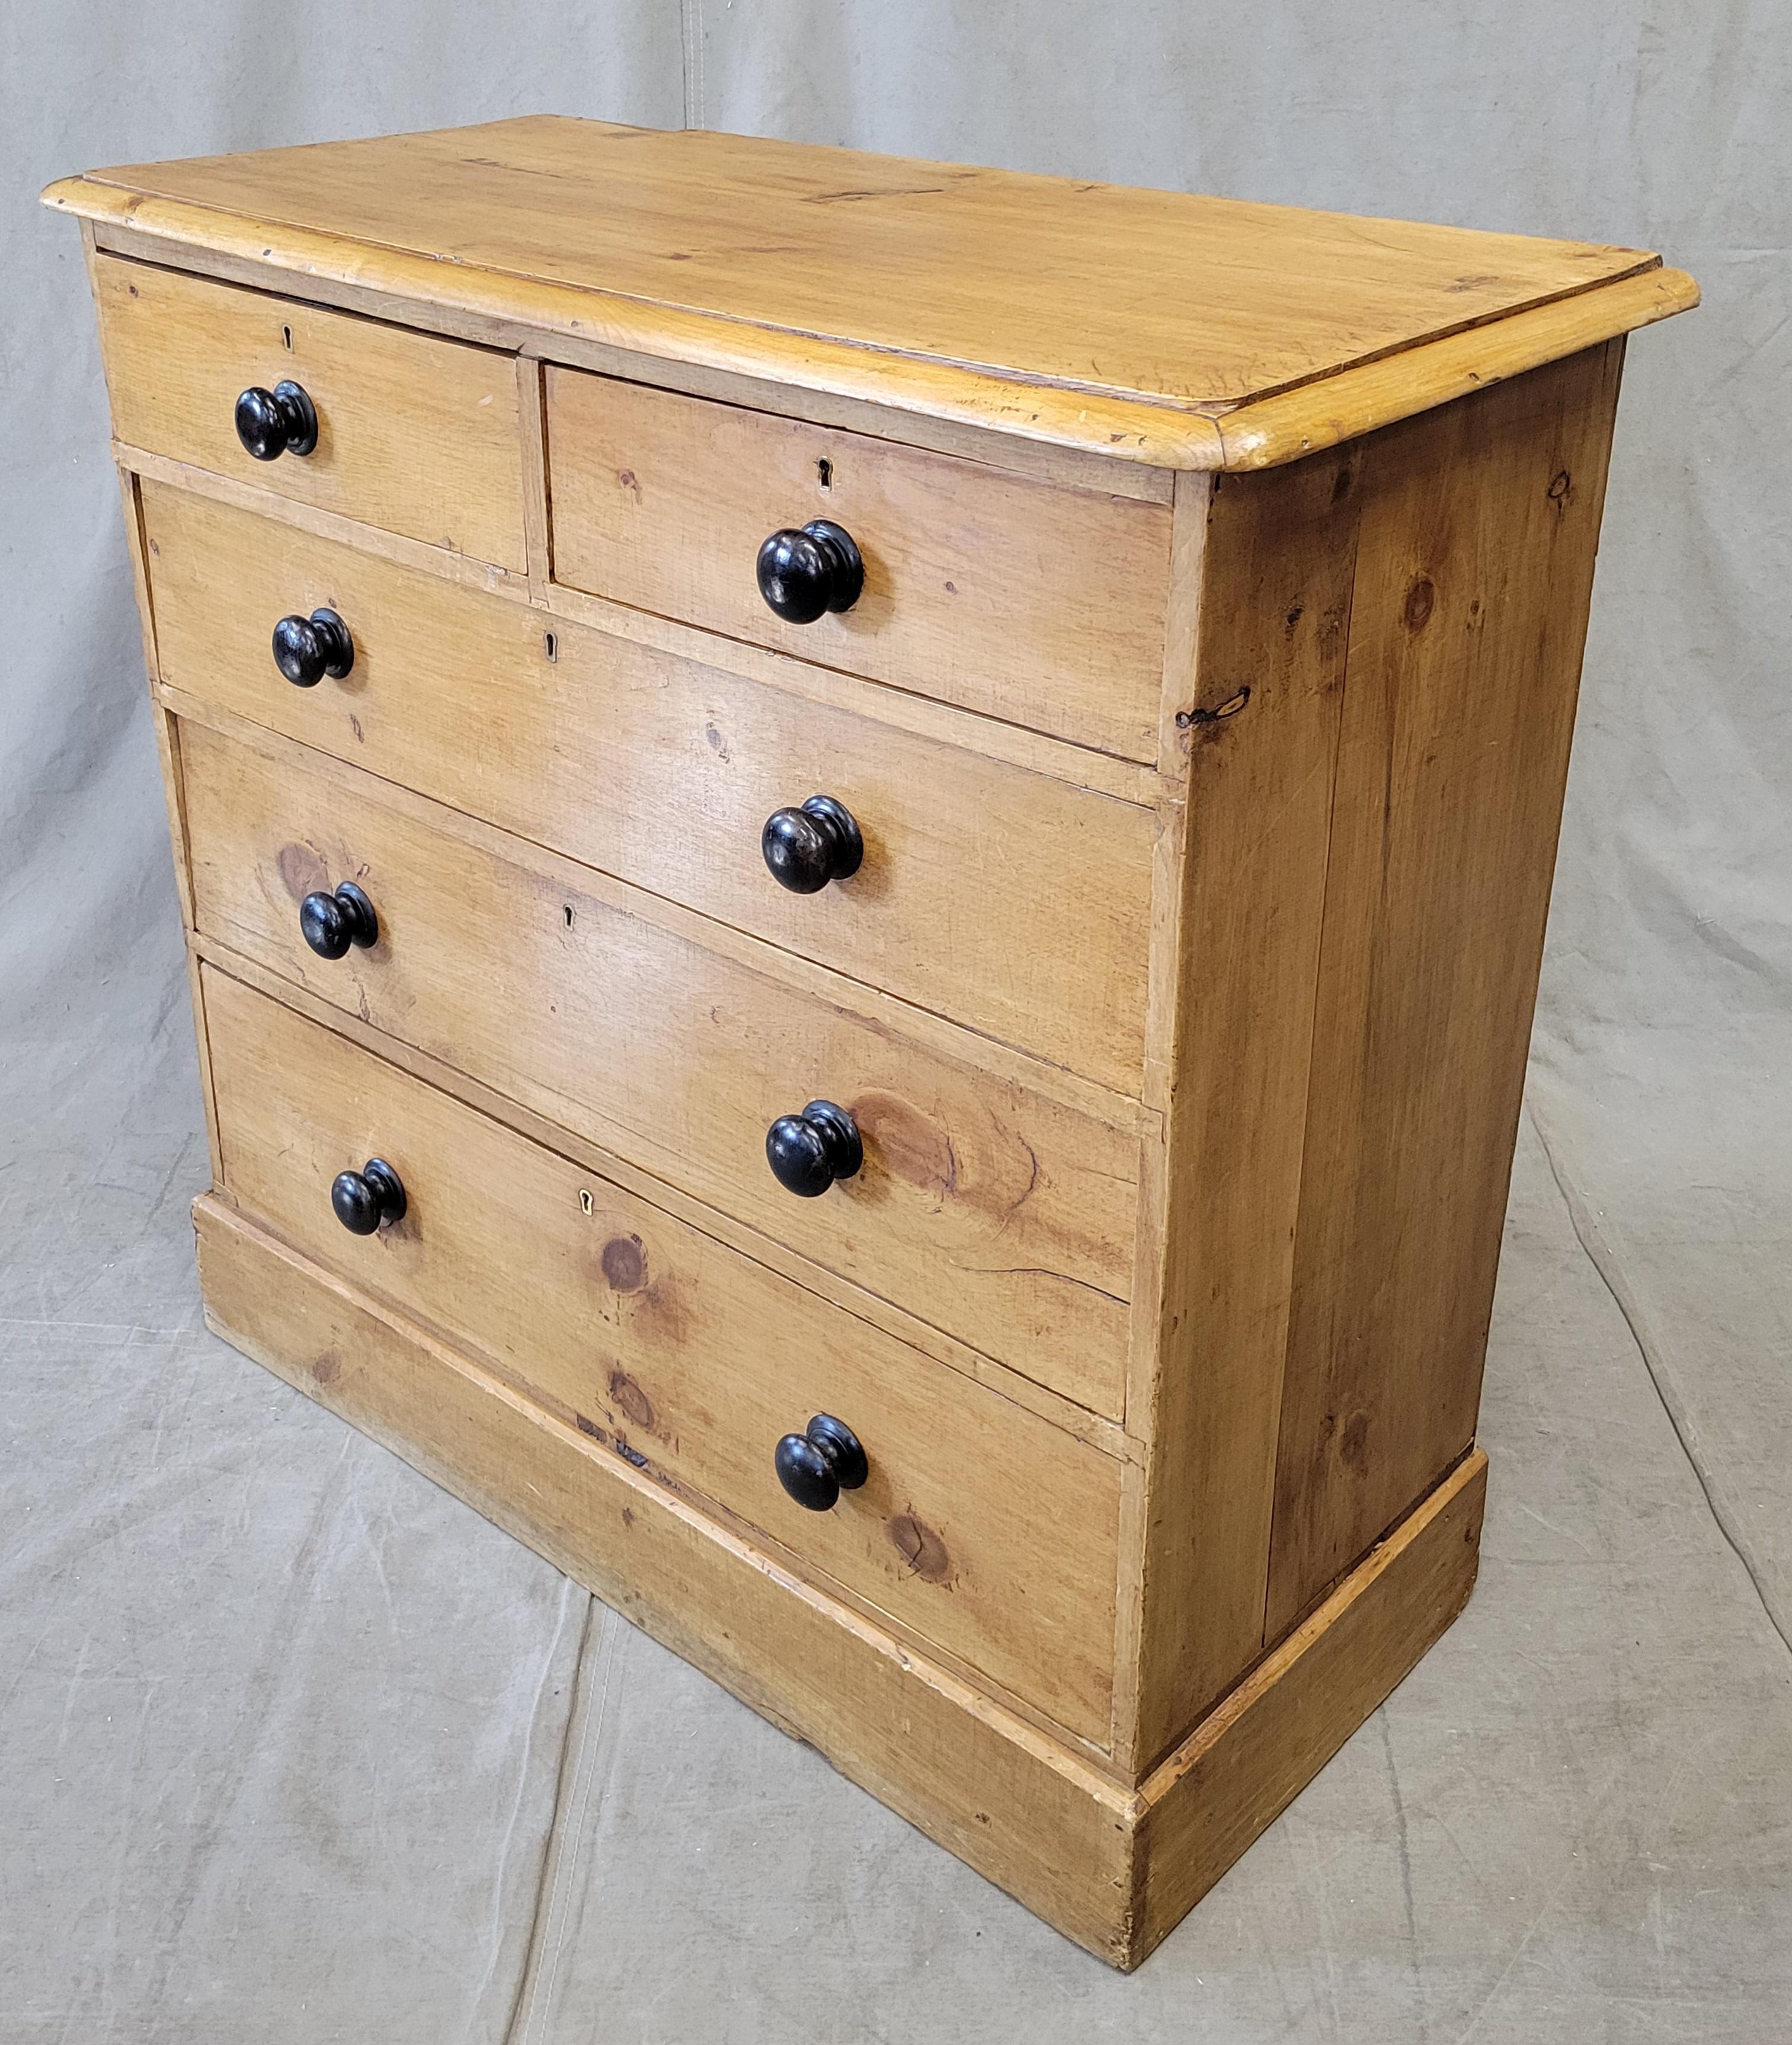 A classically beautiful antique circa 1900 English pine chest of drawers dresser. The old pine has a beautiful glow and the dark wood knobs provide contrast and visual interest. Old locks and brass keyholes are intact however there is no working